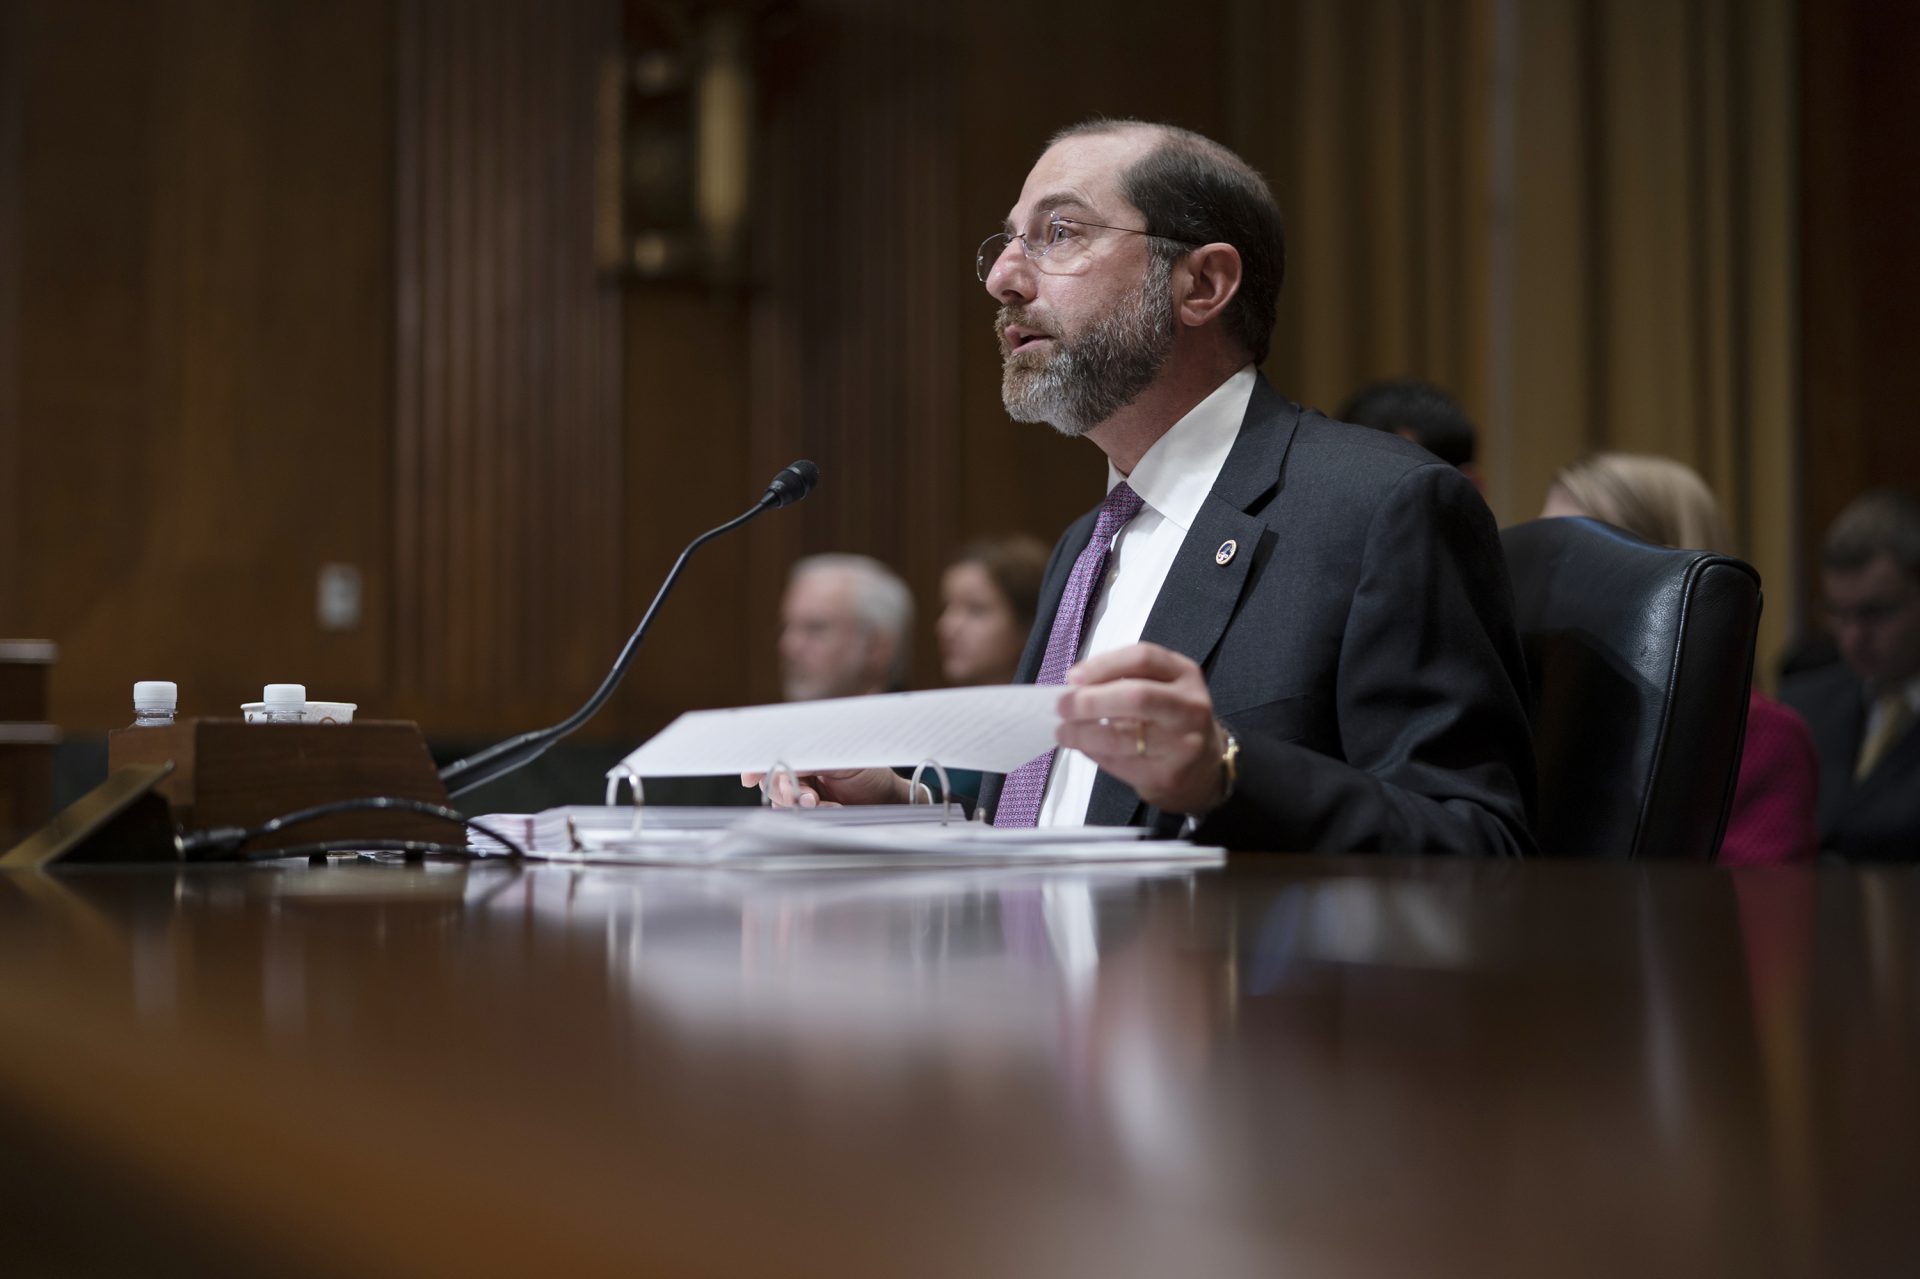 On Feb. 13, Health and Human Services Secretary Alex Azar told a Senate committee that five cities — Chicago, Los Angeles, New York, San Francisco and Seattle — were working with the CDC on an early warning network of expanded testing. Honolulu was added later.